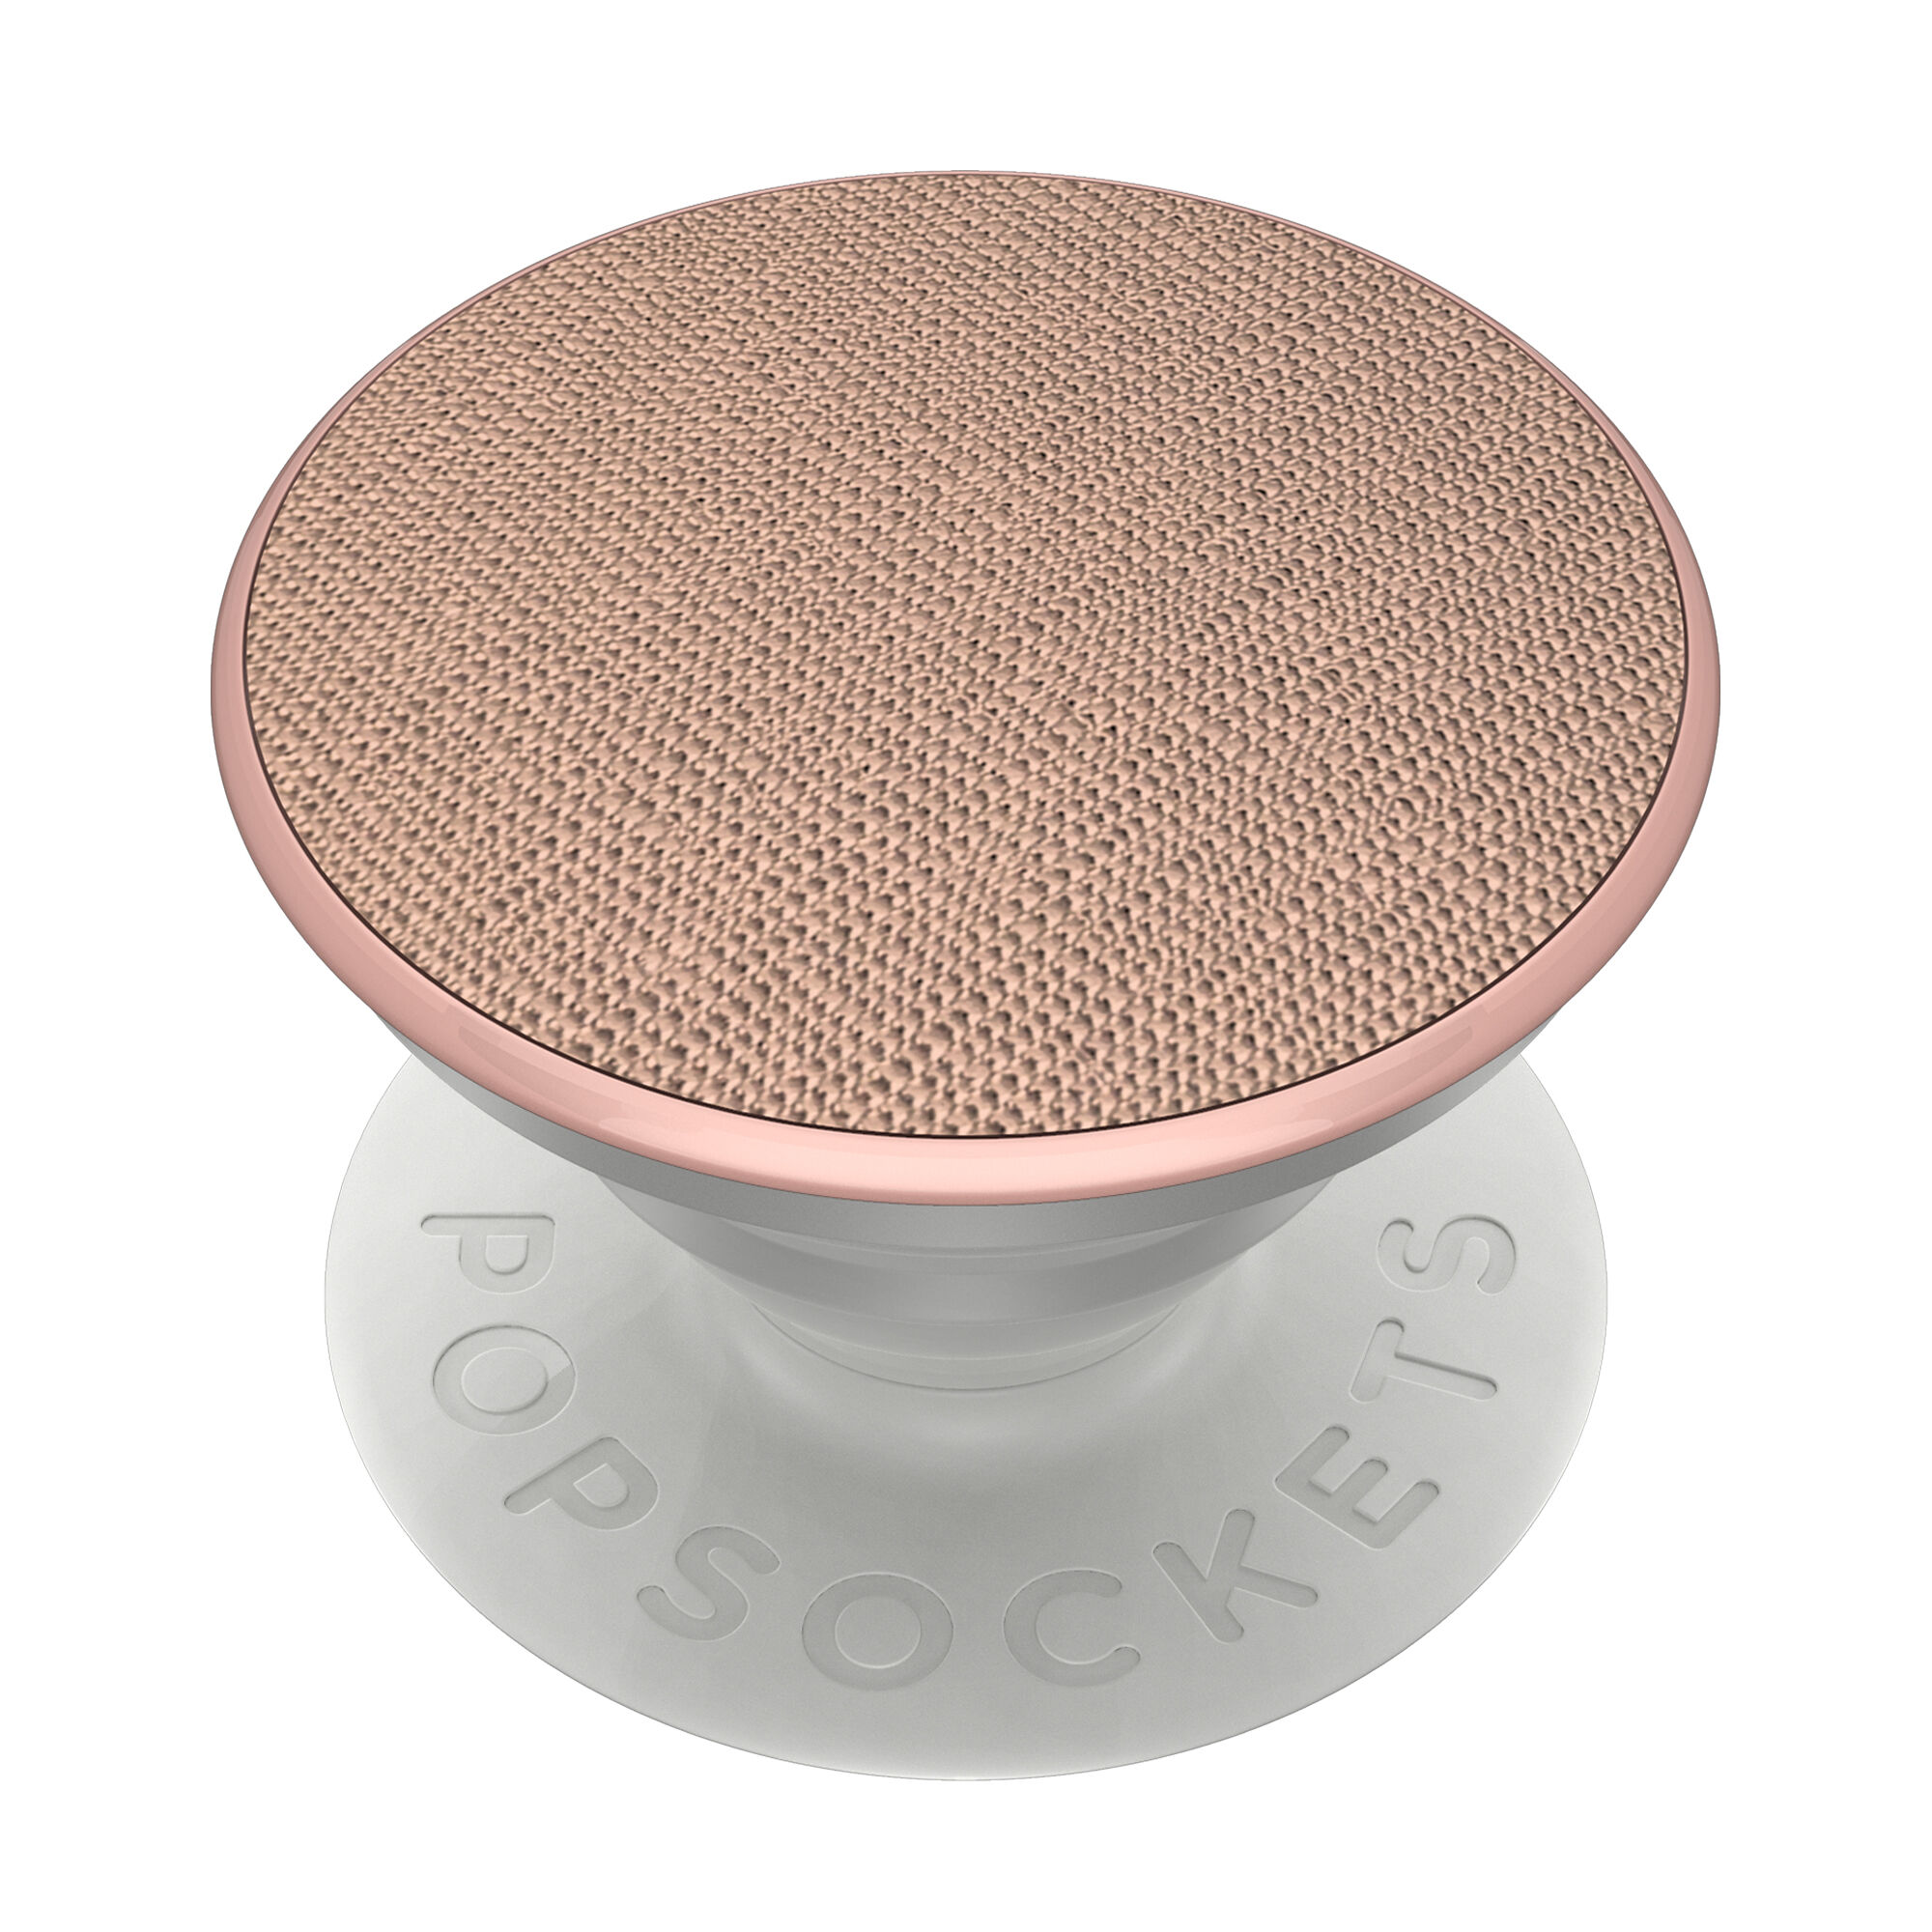 sum Dovenskab absolutte PopSockets Swappable PopGrip - Rose Gold Saffiano | Claire's